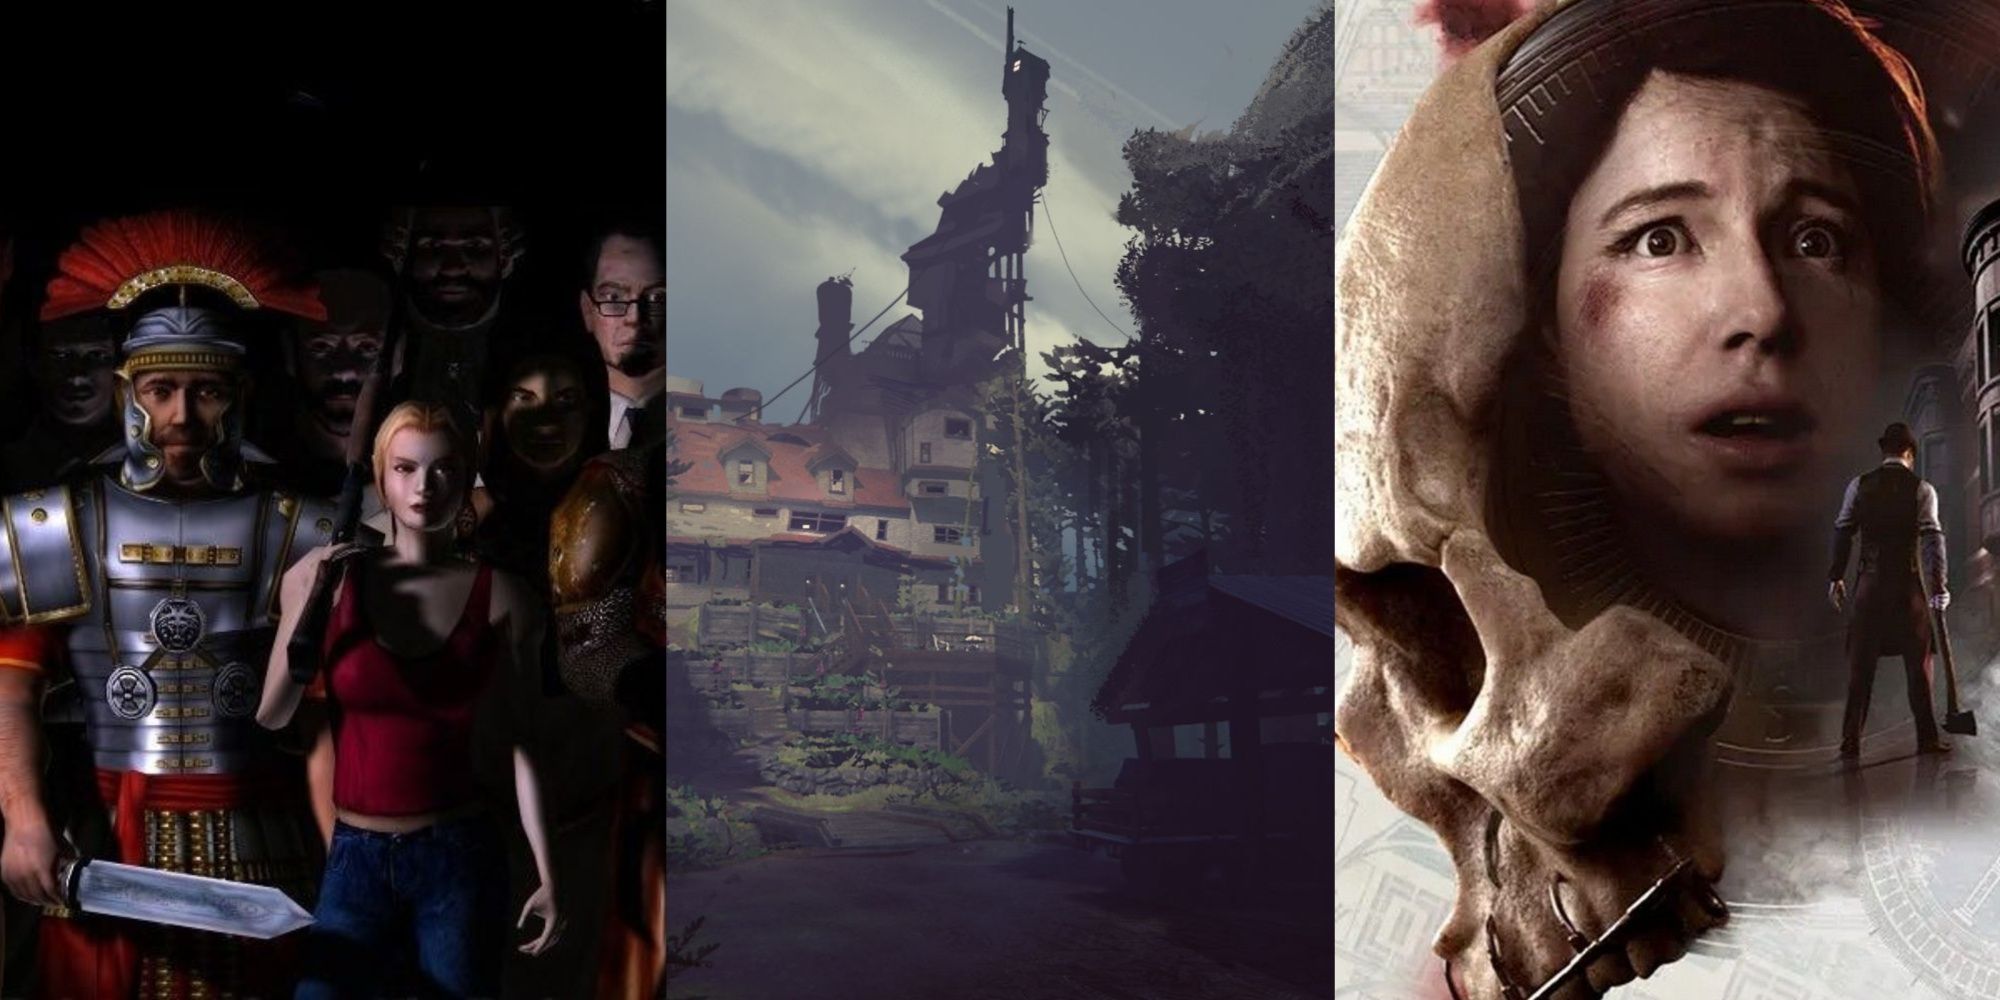 A three-image collage of Augustus, Alexndra, and other historical characters amid a dark background in Eternal Darkness: Sanity's Requiem, the Finch house from What Remains of Edith Finch, and Jessie Buckley's Kate Wilder on the cover art of Dark Pictures' The Devil In Me.